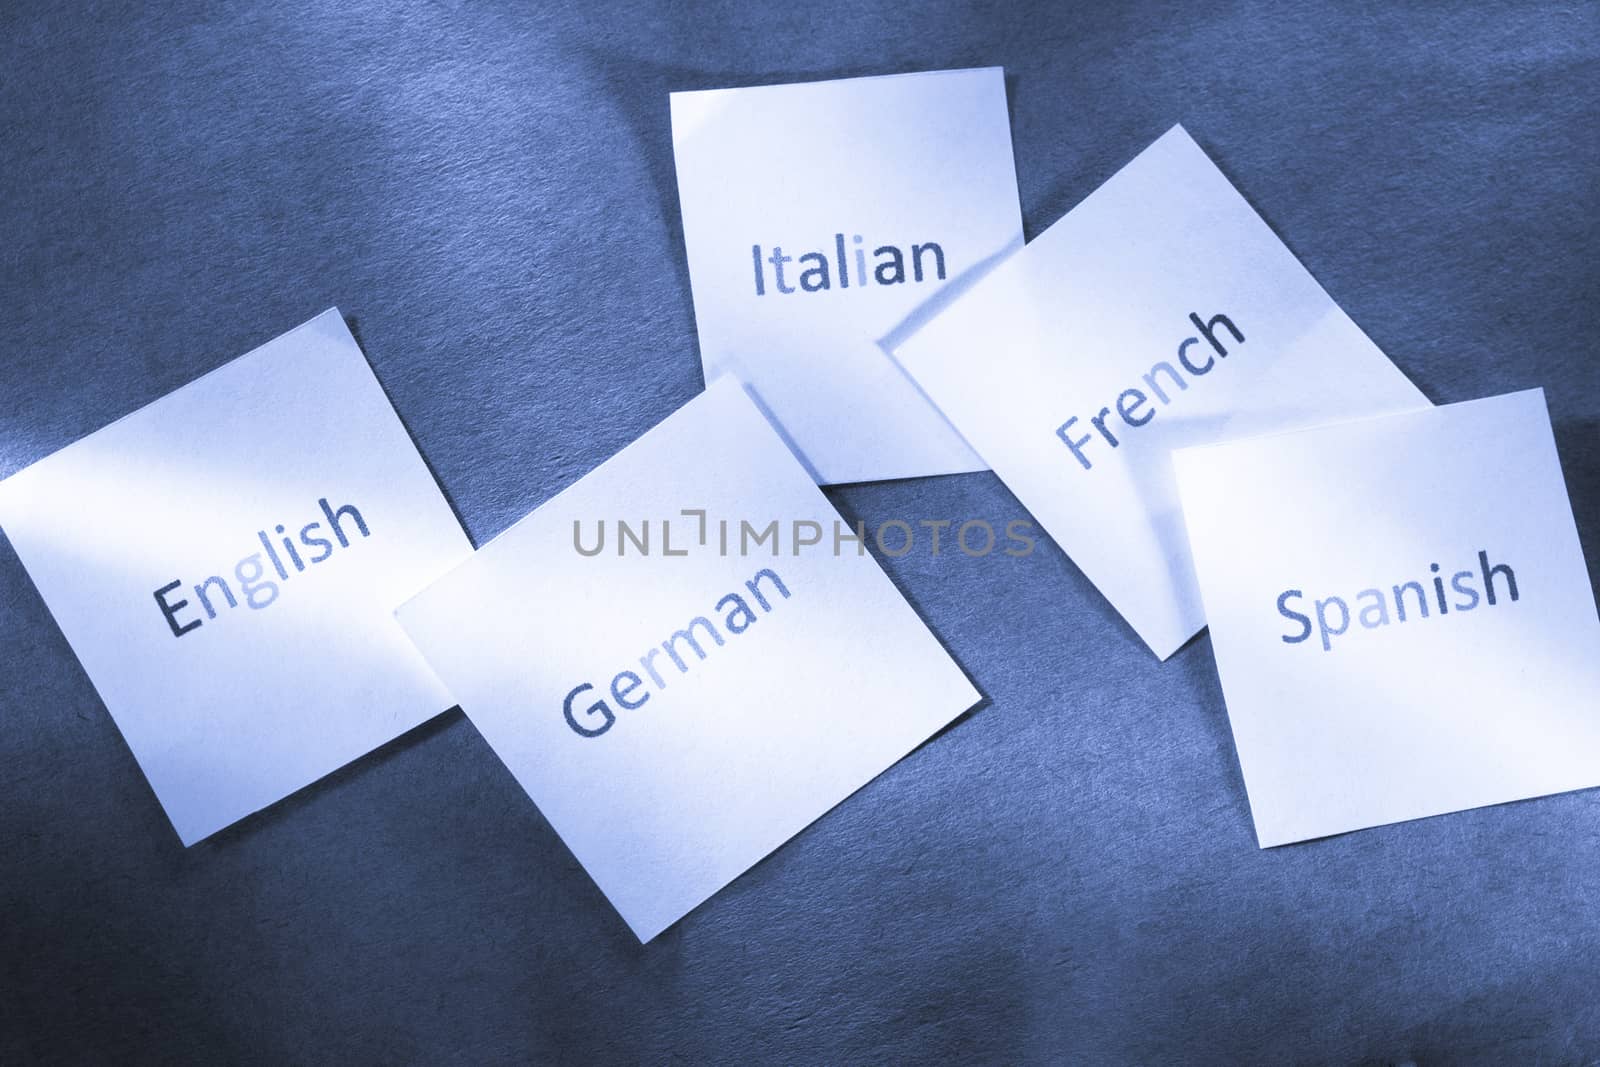 Cards with different languages by Garsya